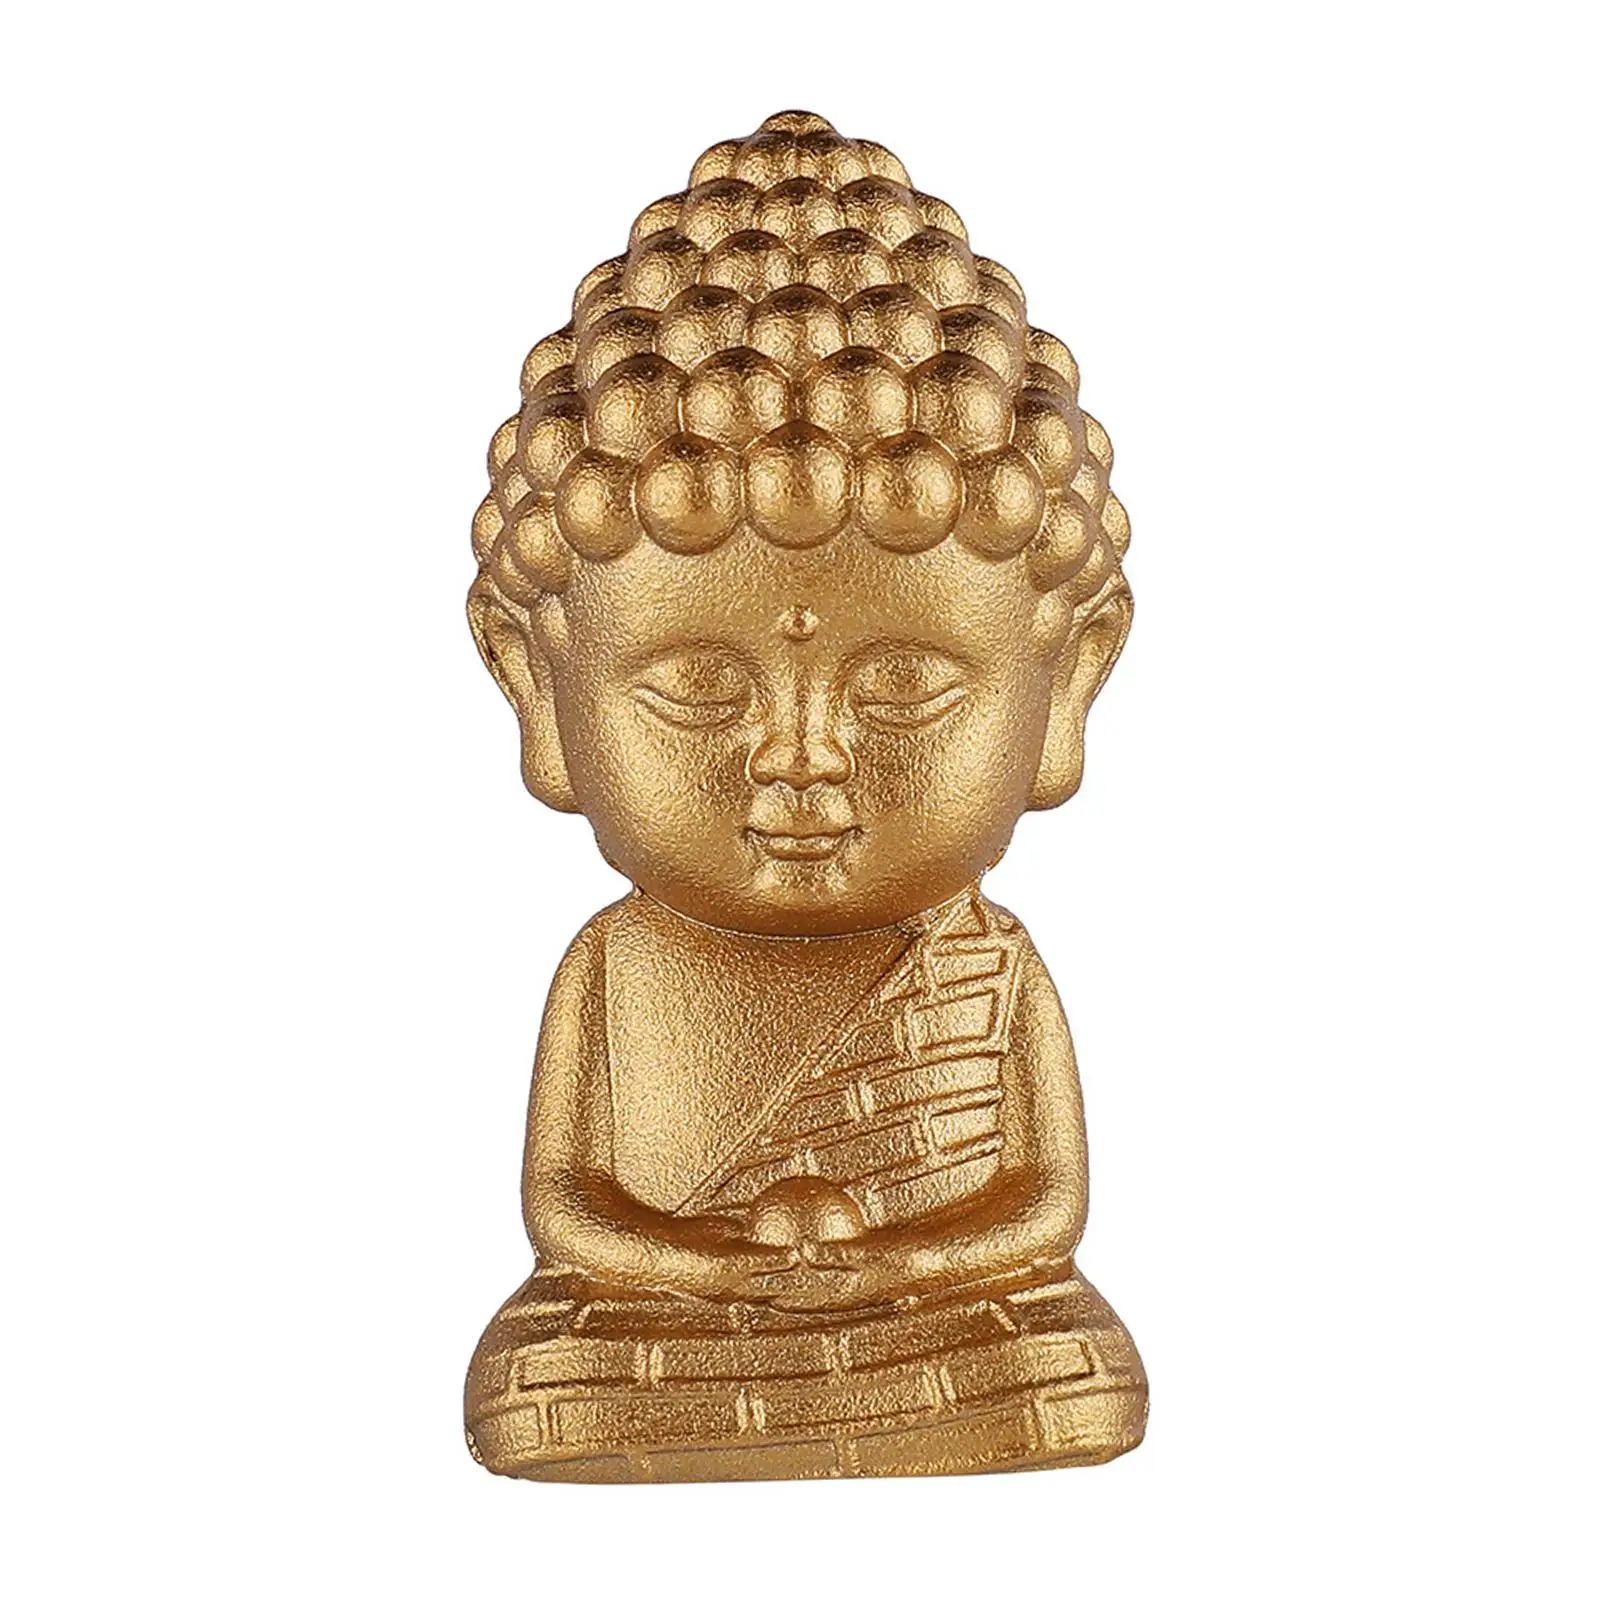 Miniature Buddha Statue Decorative Collectibles Fengshui Furnishing Gifts Sculpture for Living Room Housewarming Study Office